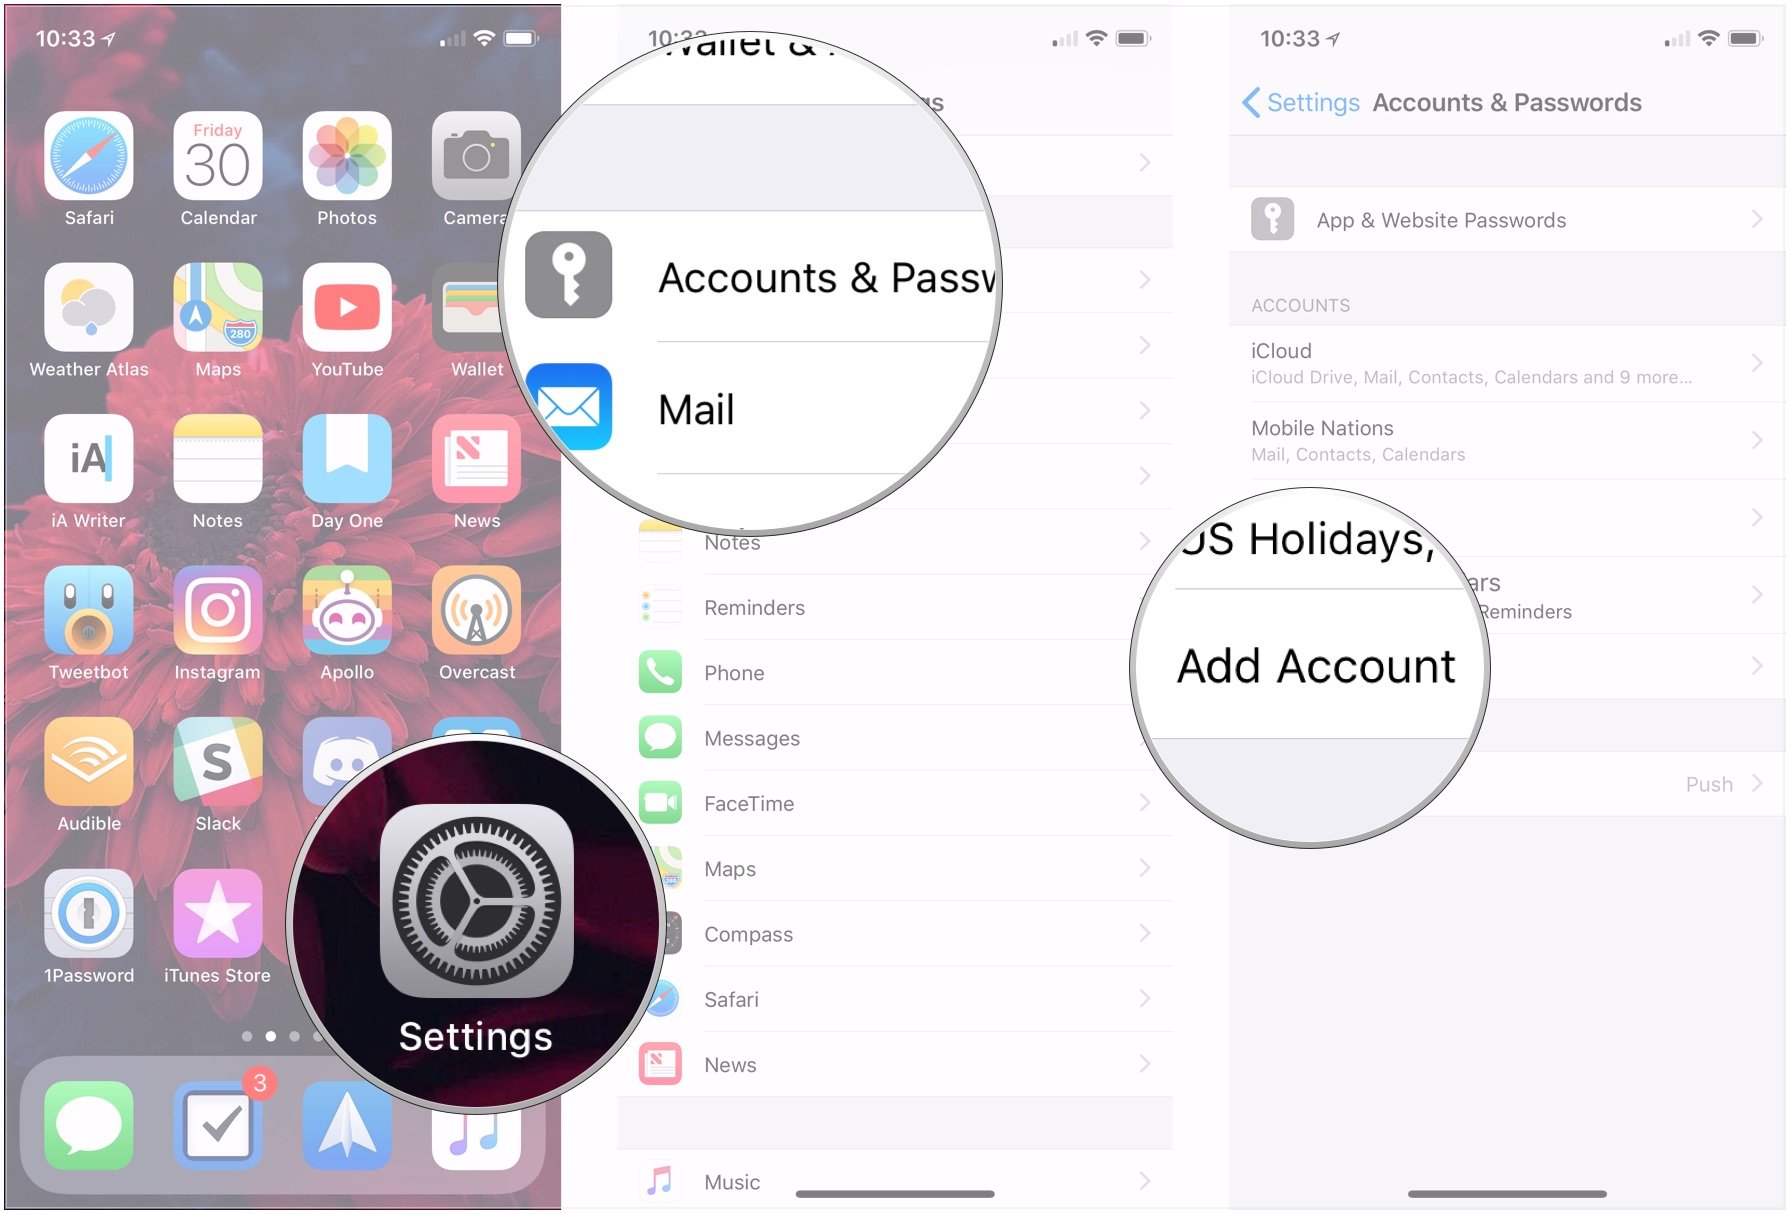 Open Settings, tap Accounts & Passwords, tap Add account